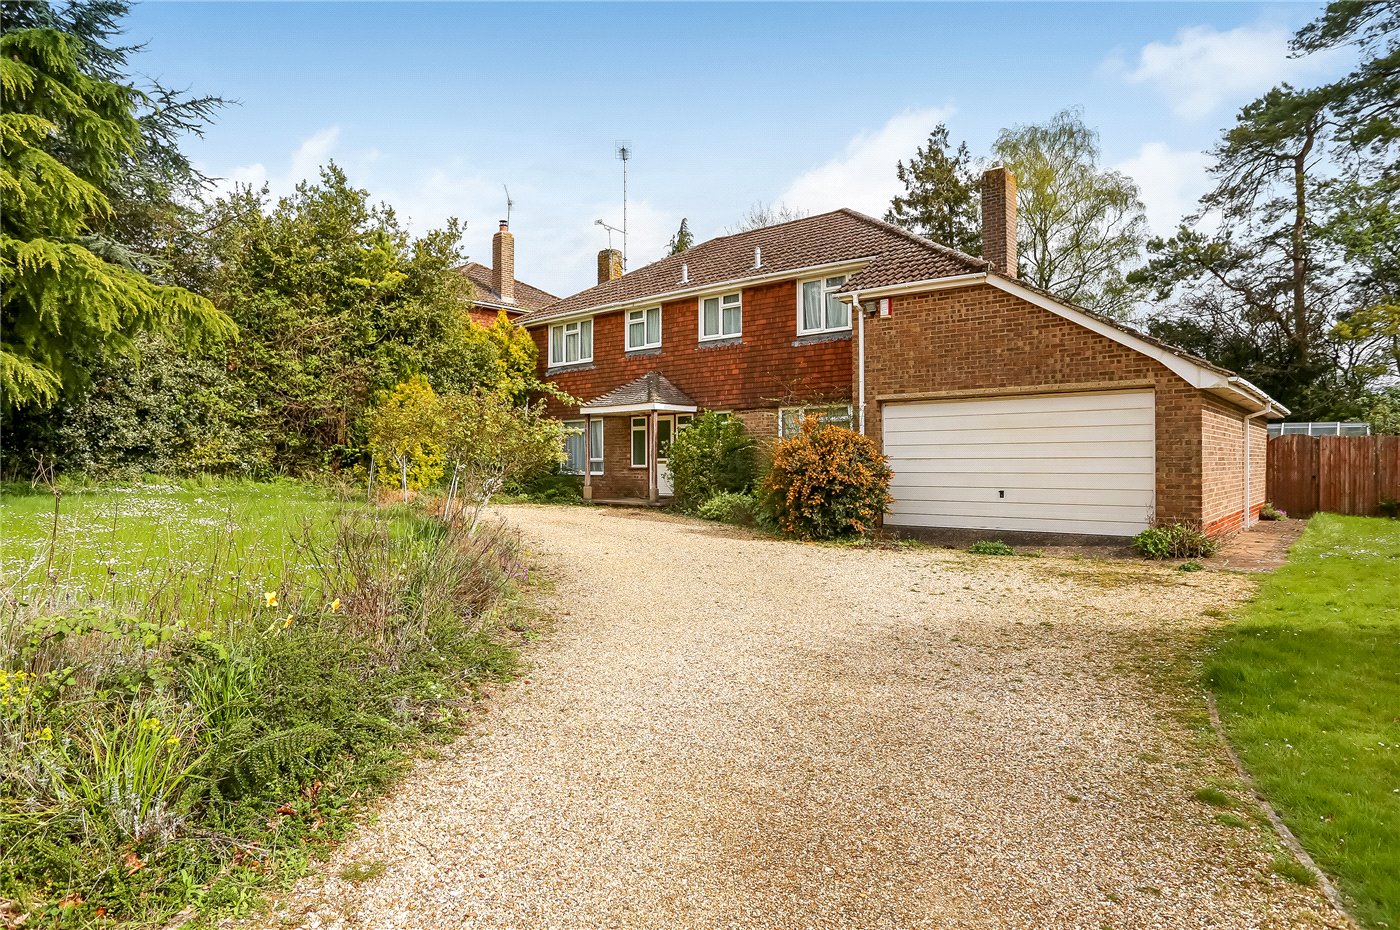 Dale Close, Littleton, Winchester, Hampshire, SO22 4 bedroom house in Littleton